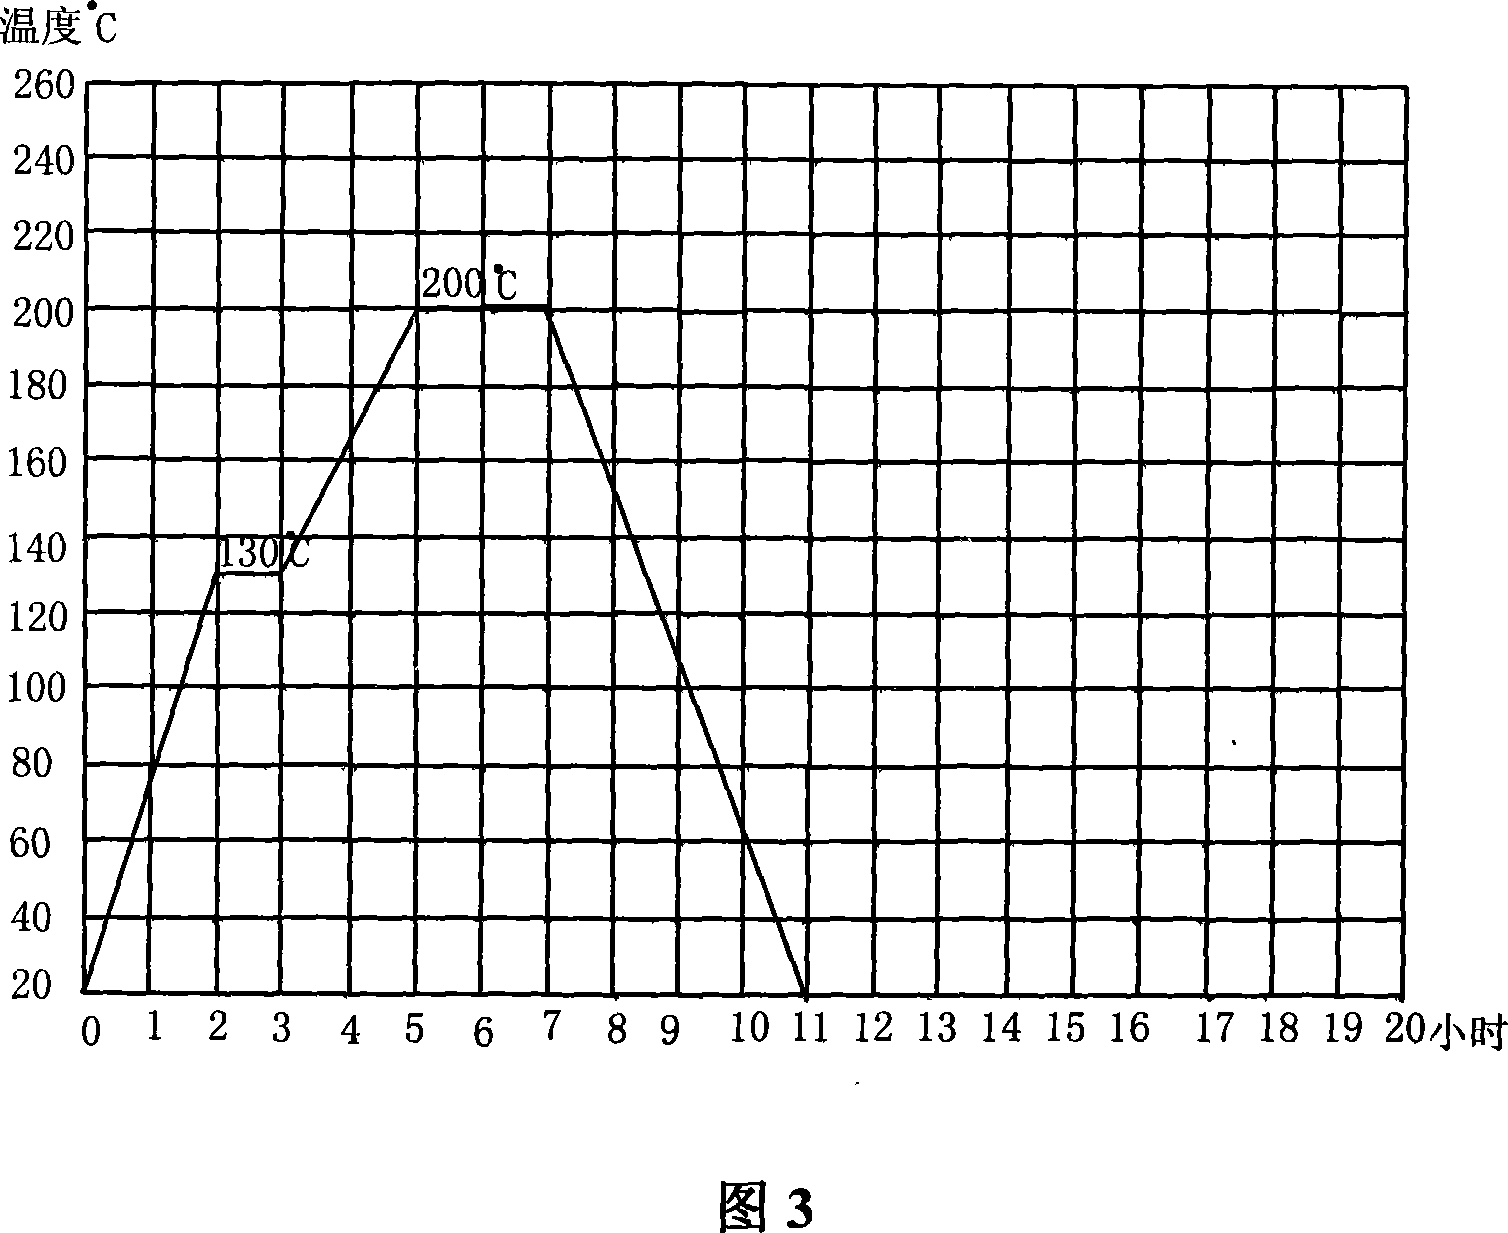 Wine rod type filter element and method for making same